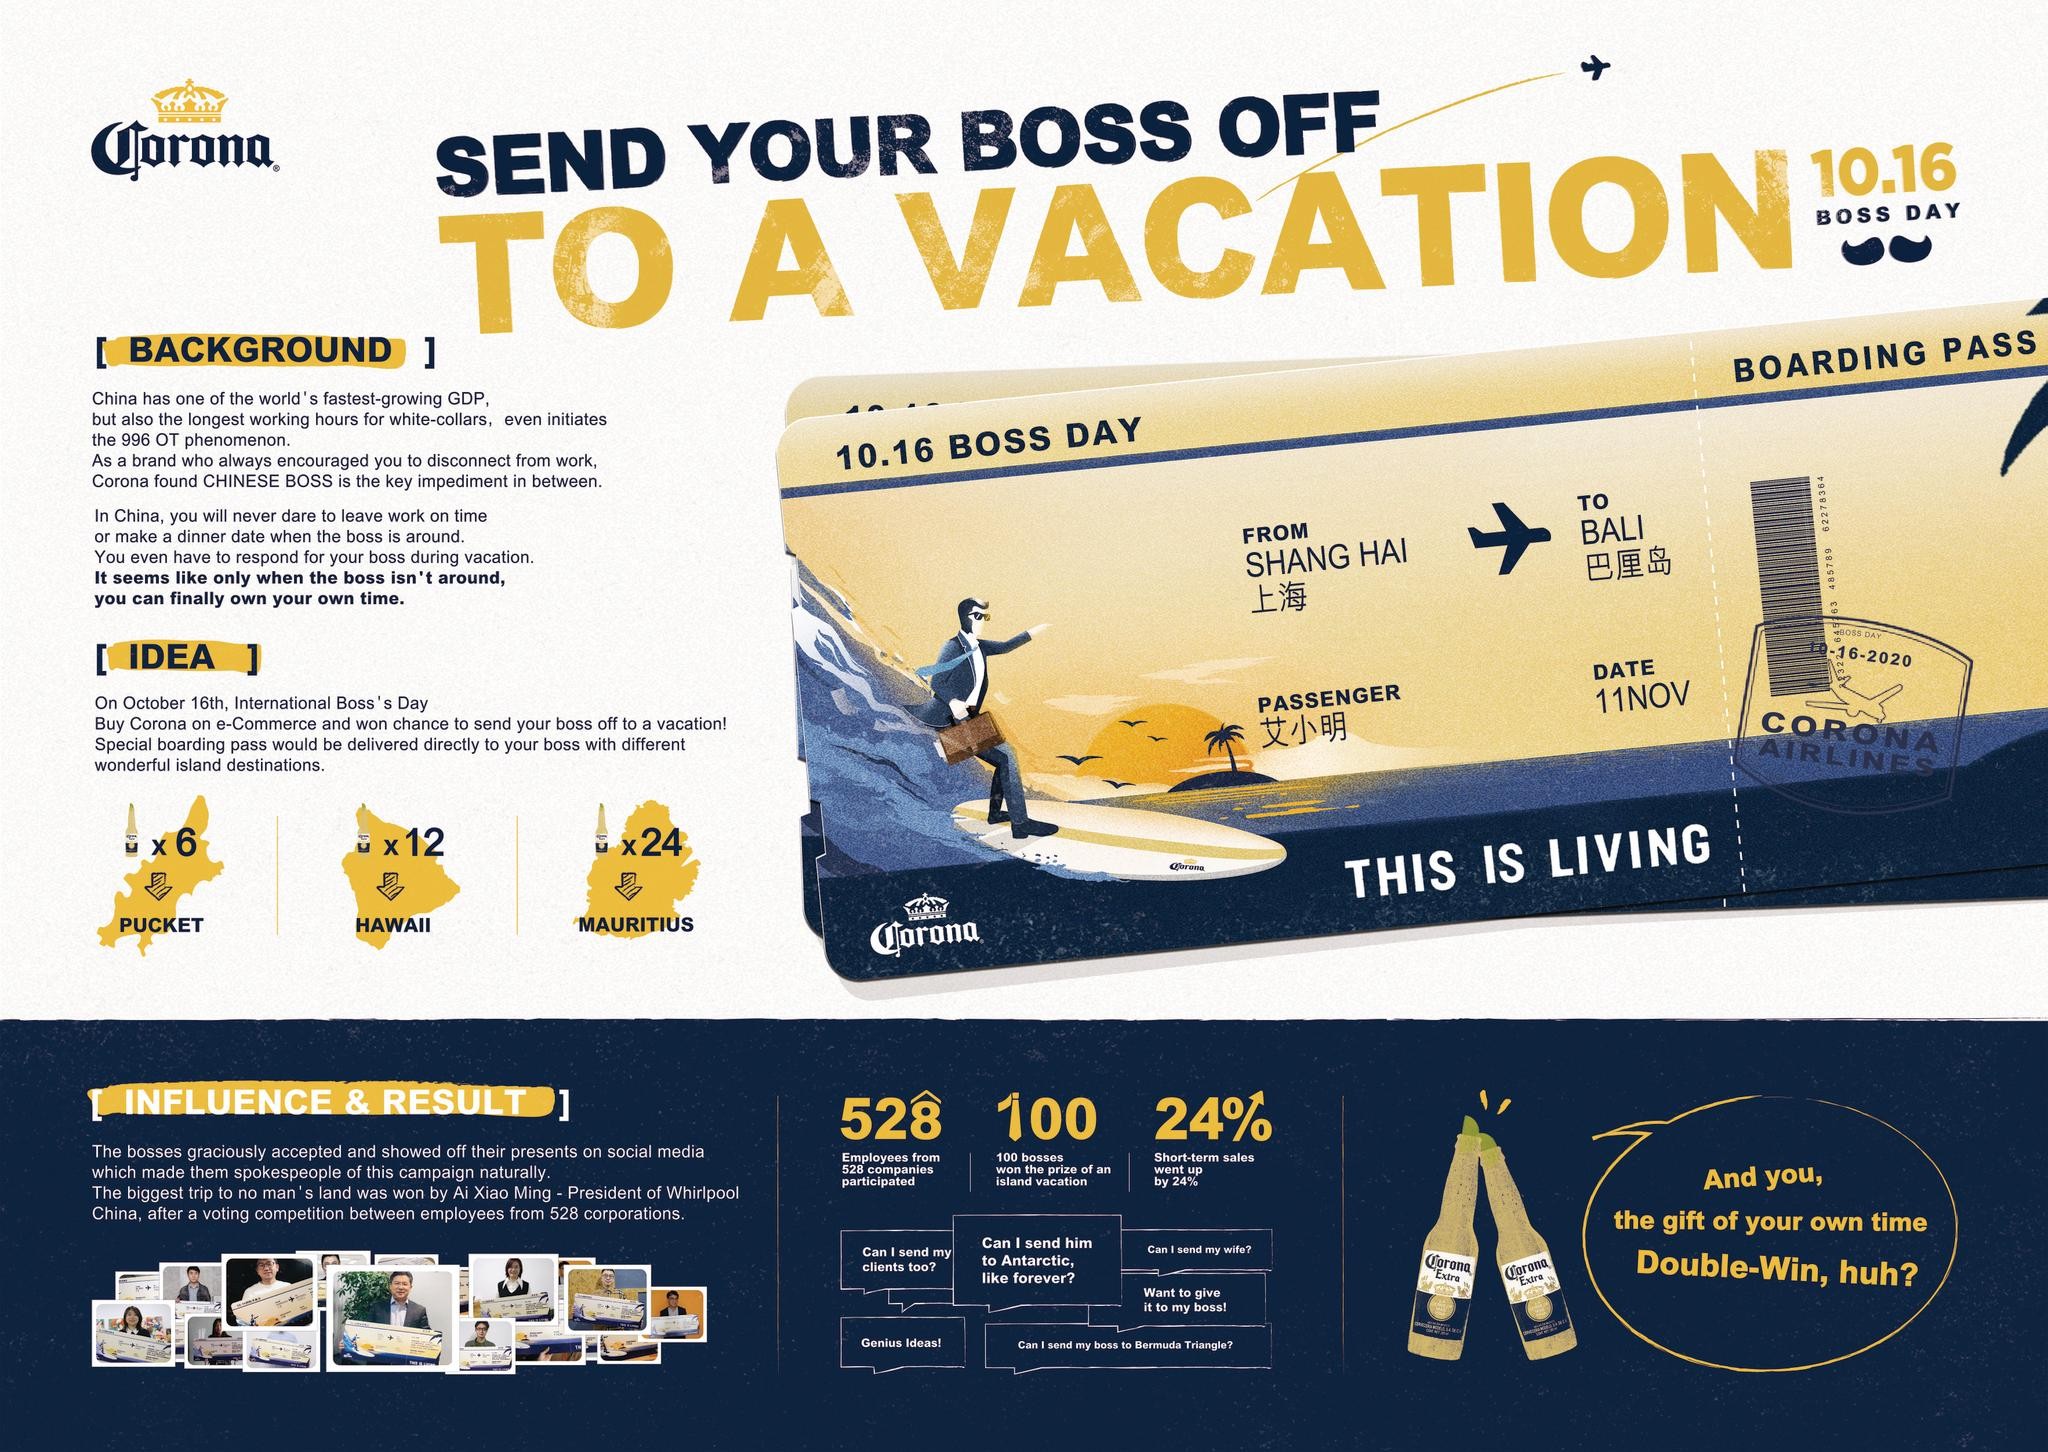 SEND YOUR BOSS OFF TO A VACATION